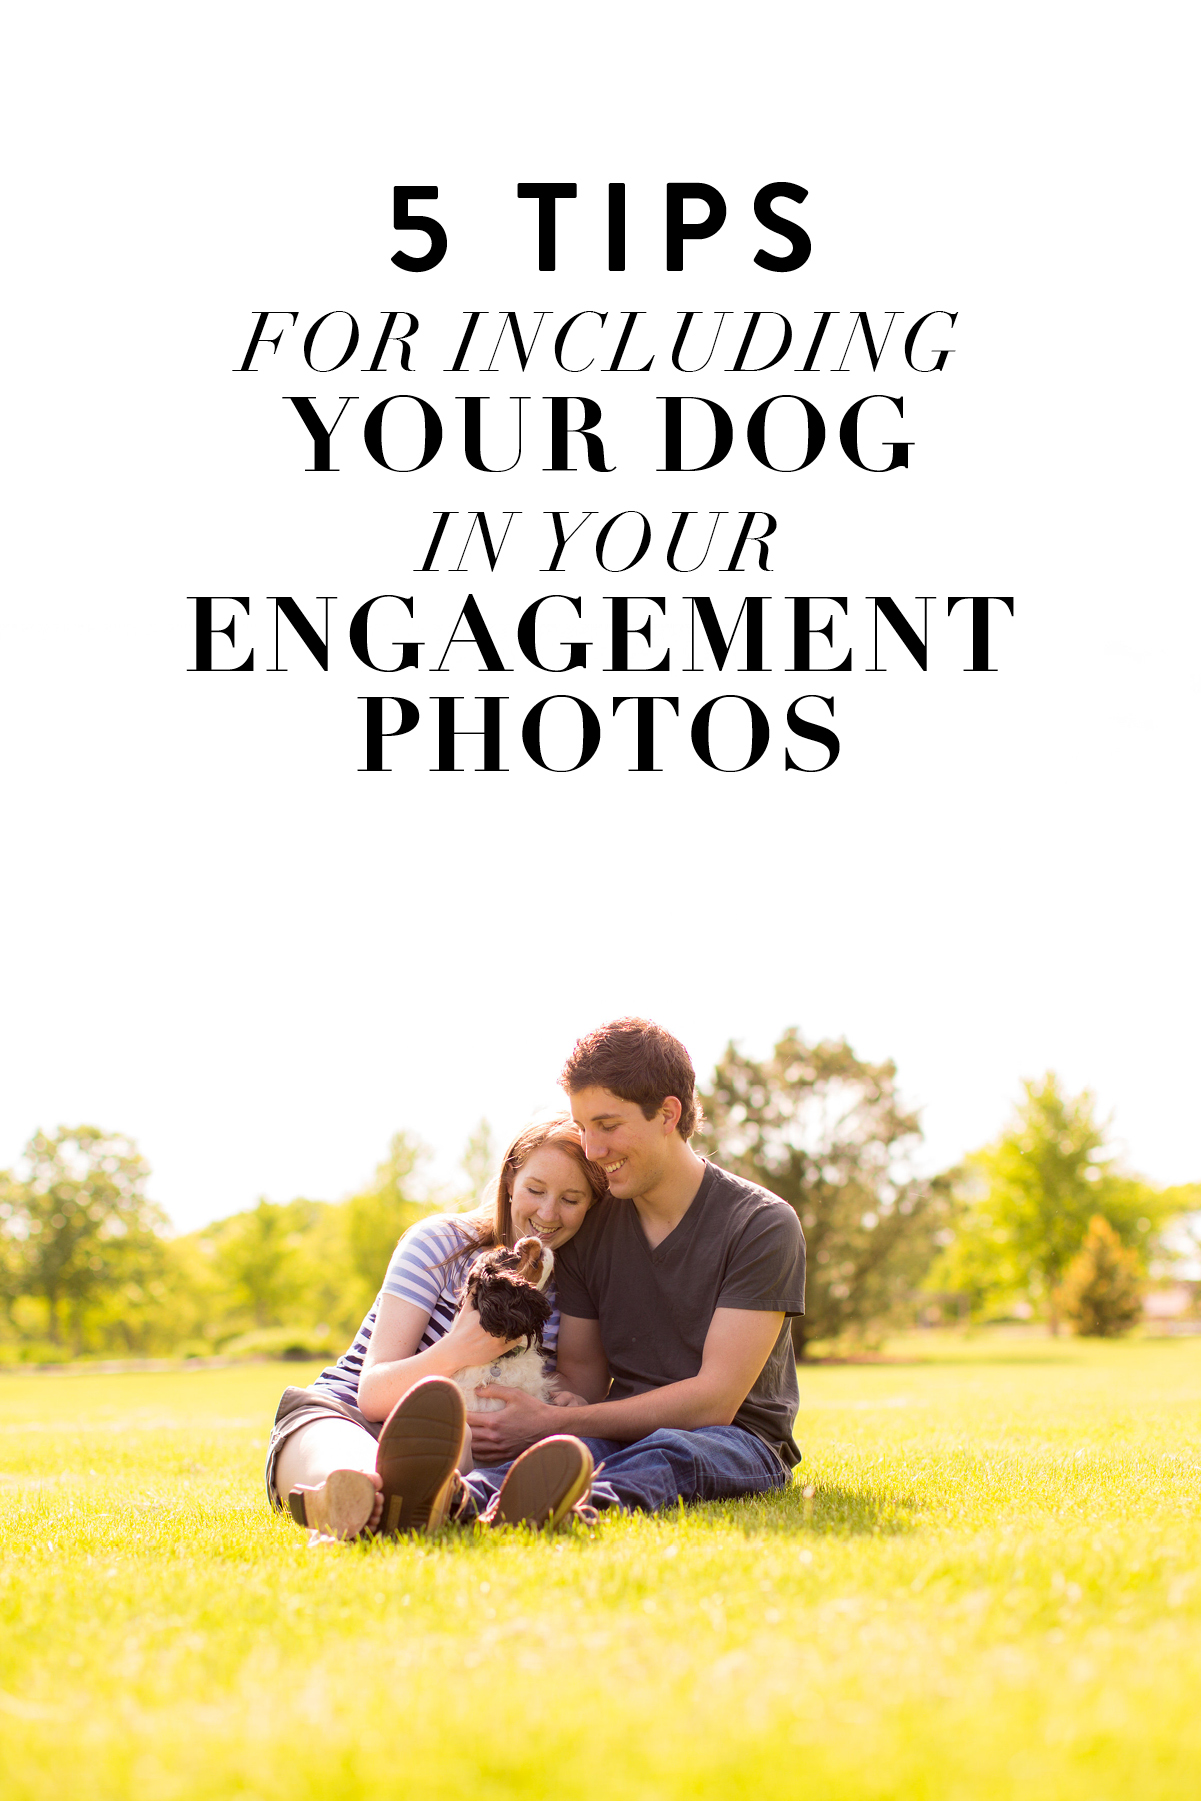 5 Tips for Including Your Dog in Your Engagement Photos